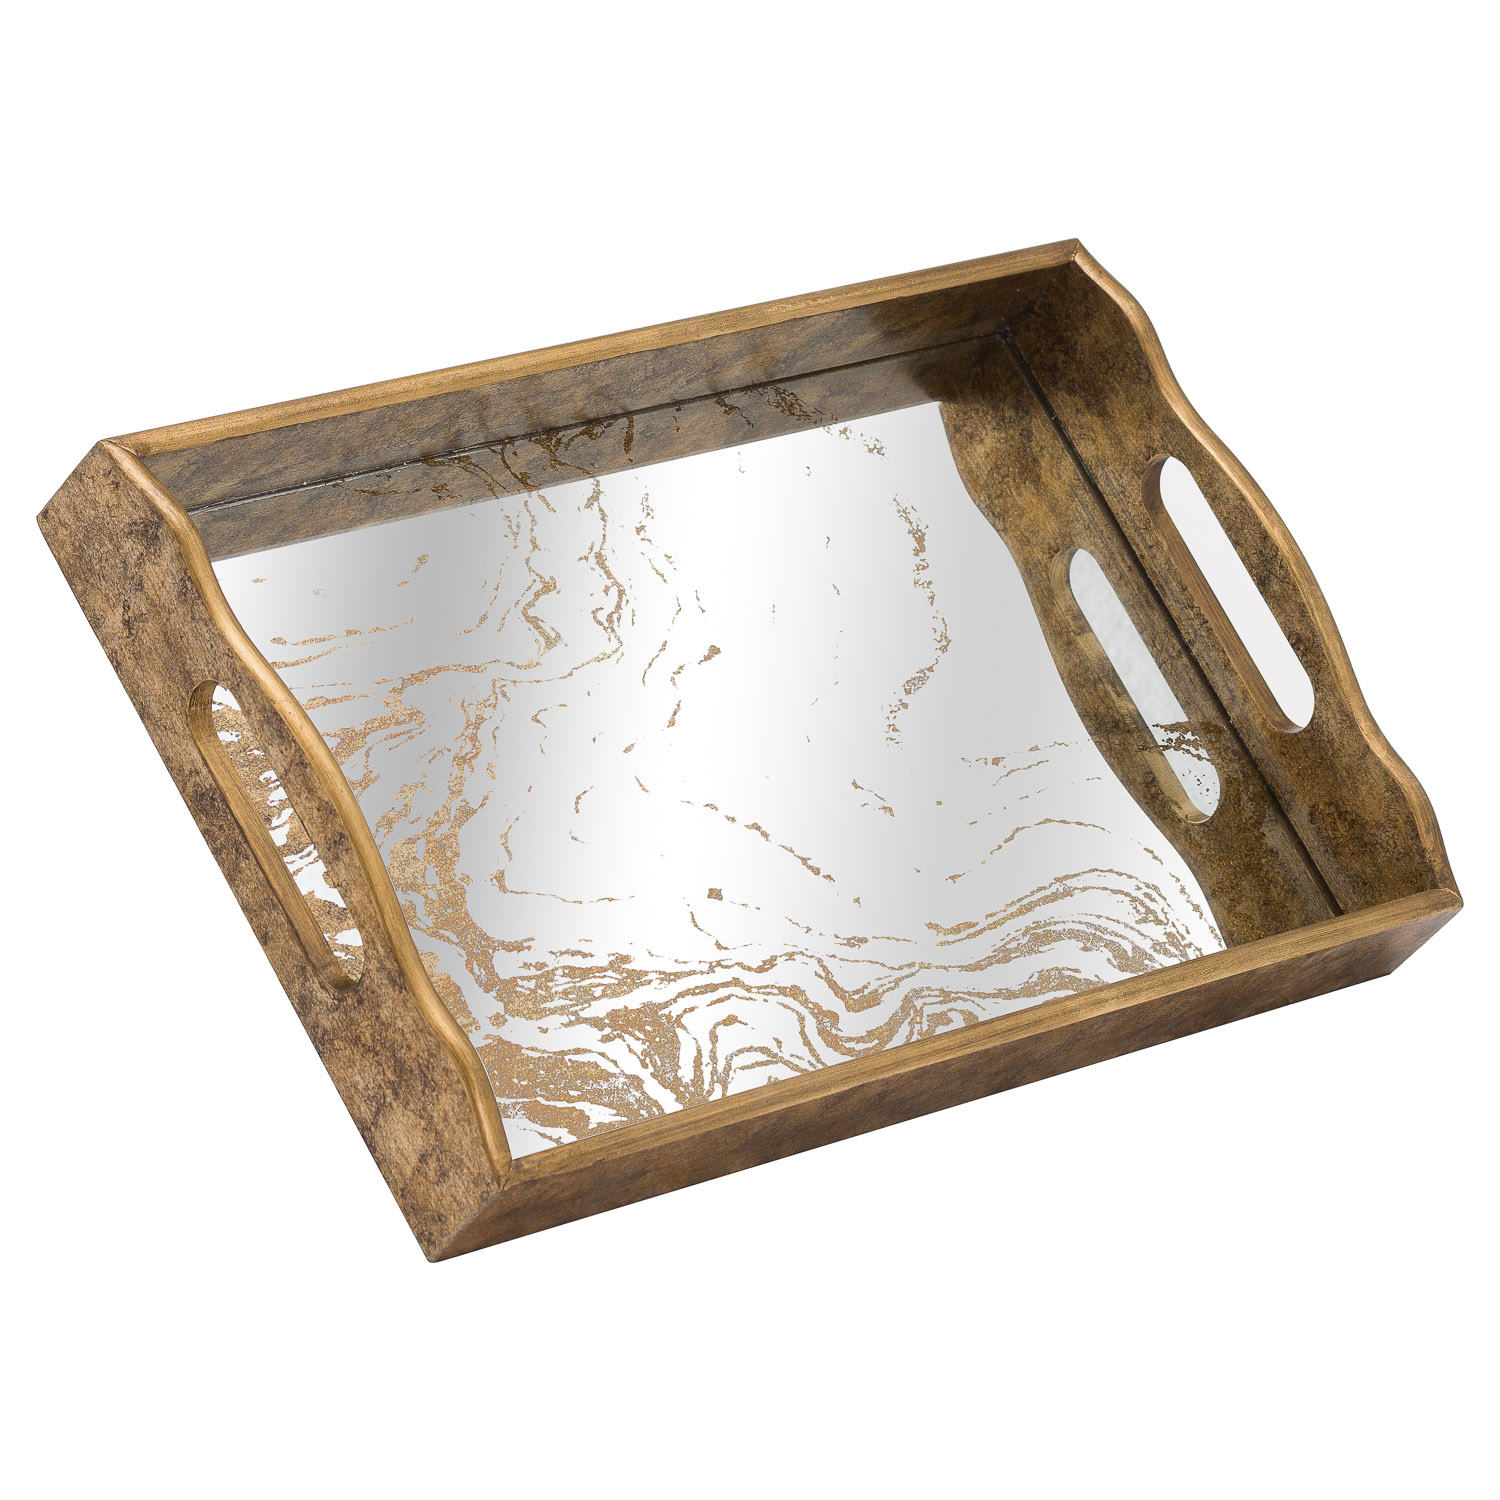 Augustus Mirrored Tray With Marbling Effect - Image 1